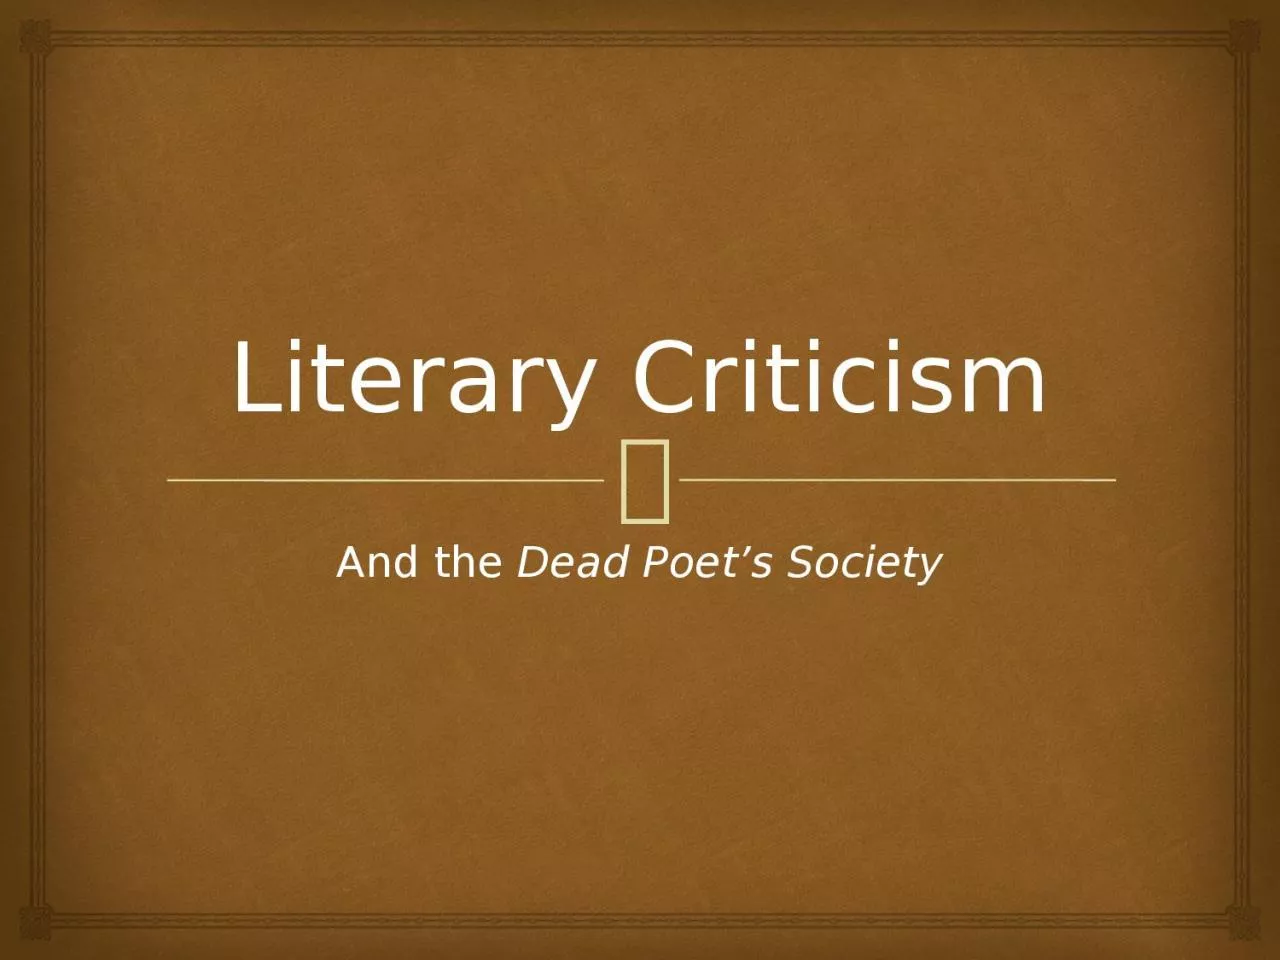 Literary Criticism And the